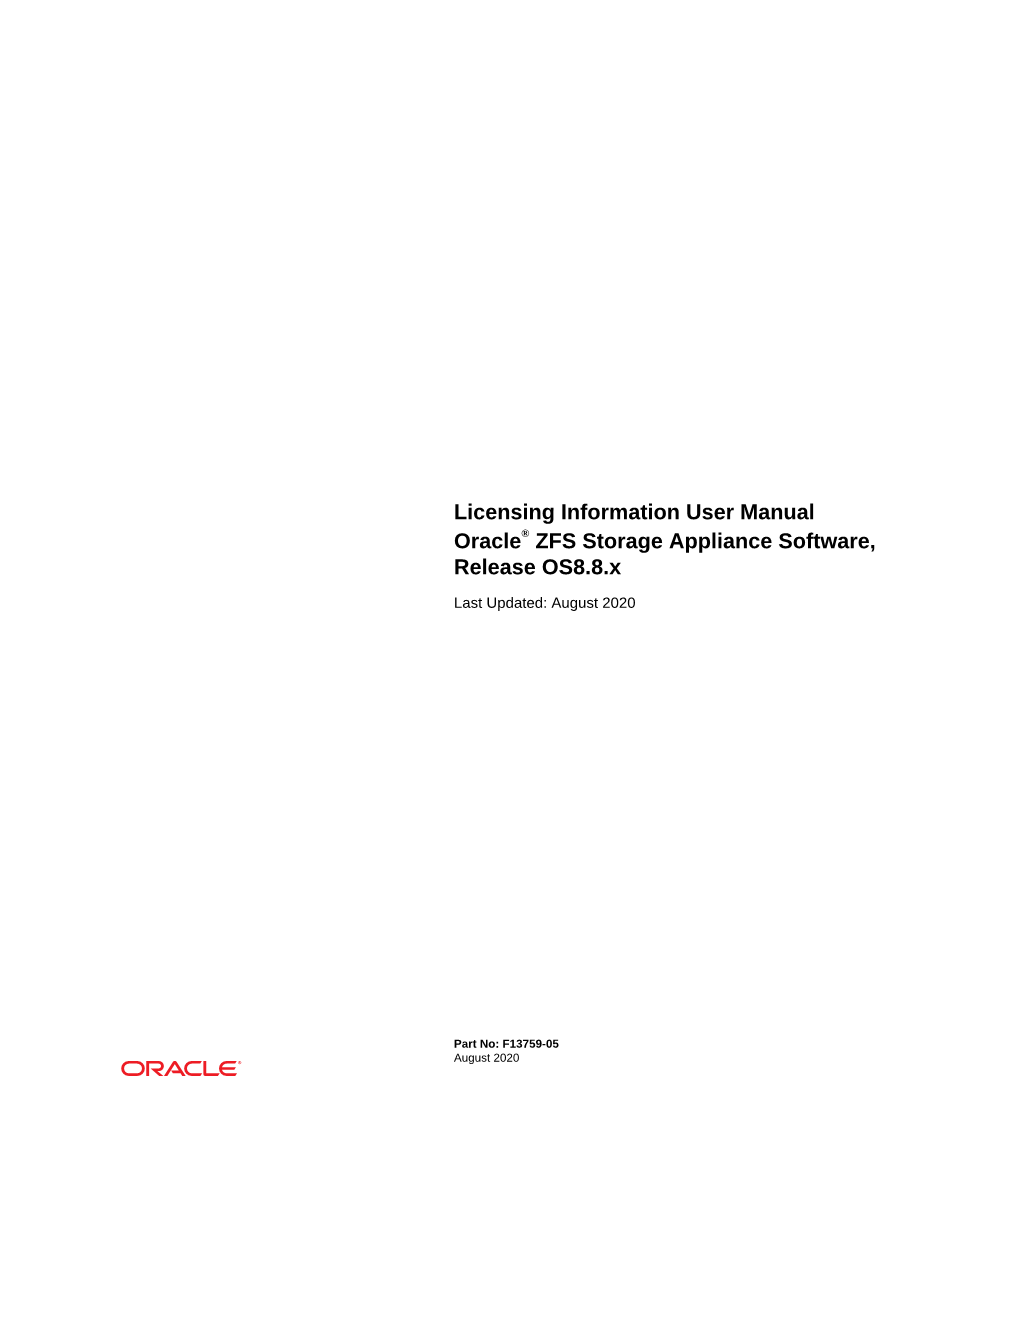 Licensing Information User Manual Oracle® ZFS Storage Appliance Software, Release OS8.8.X